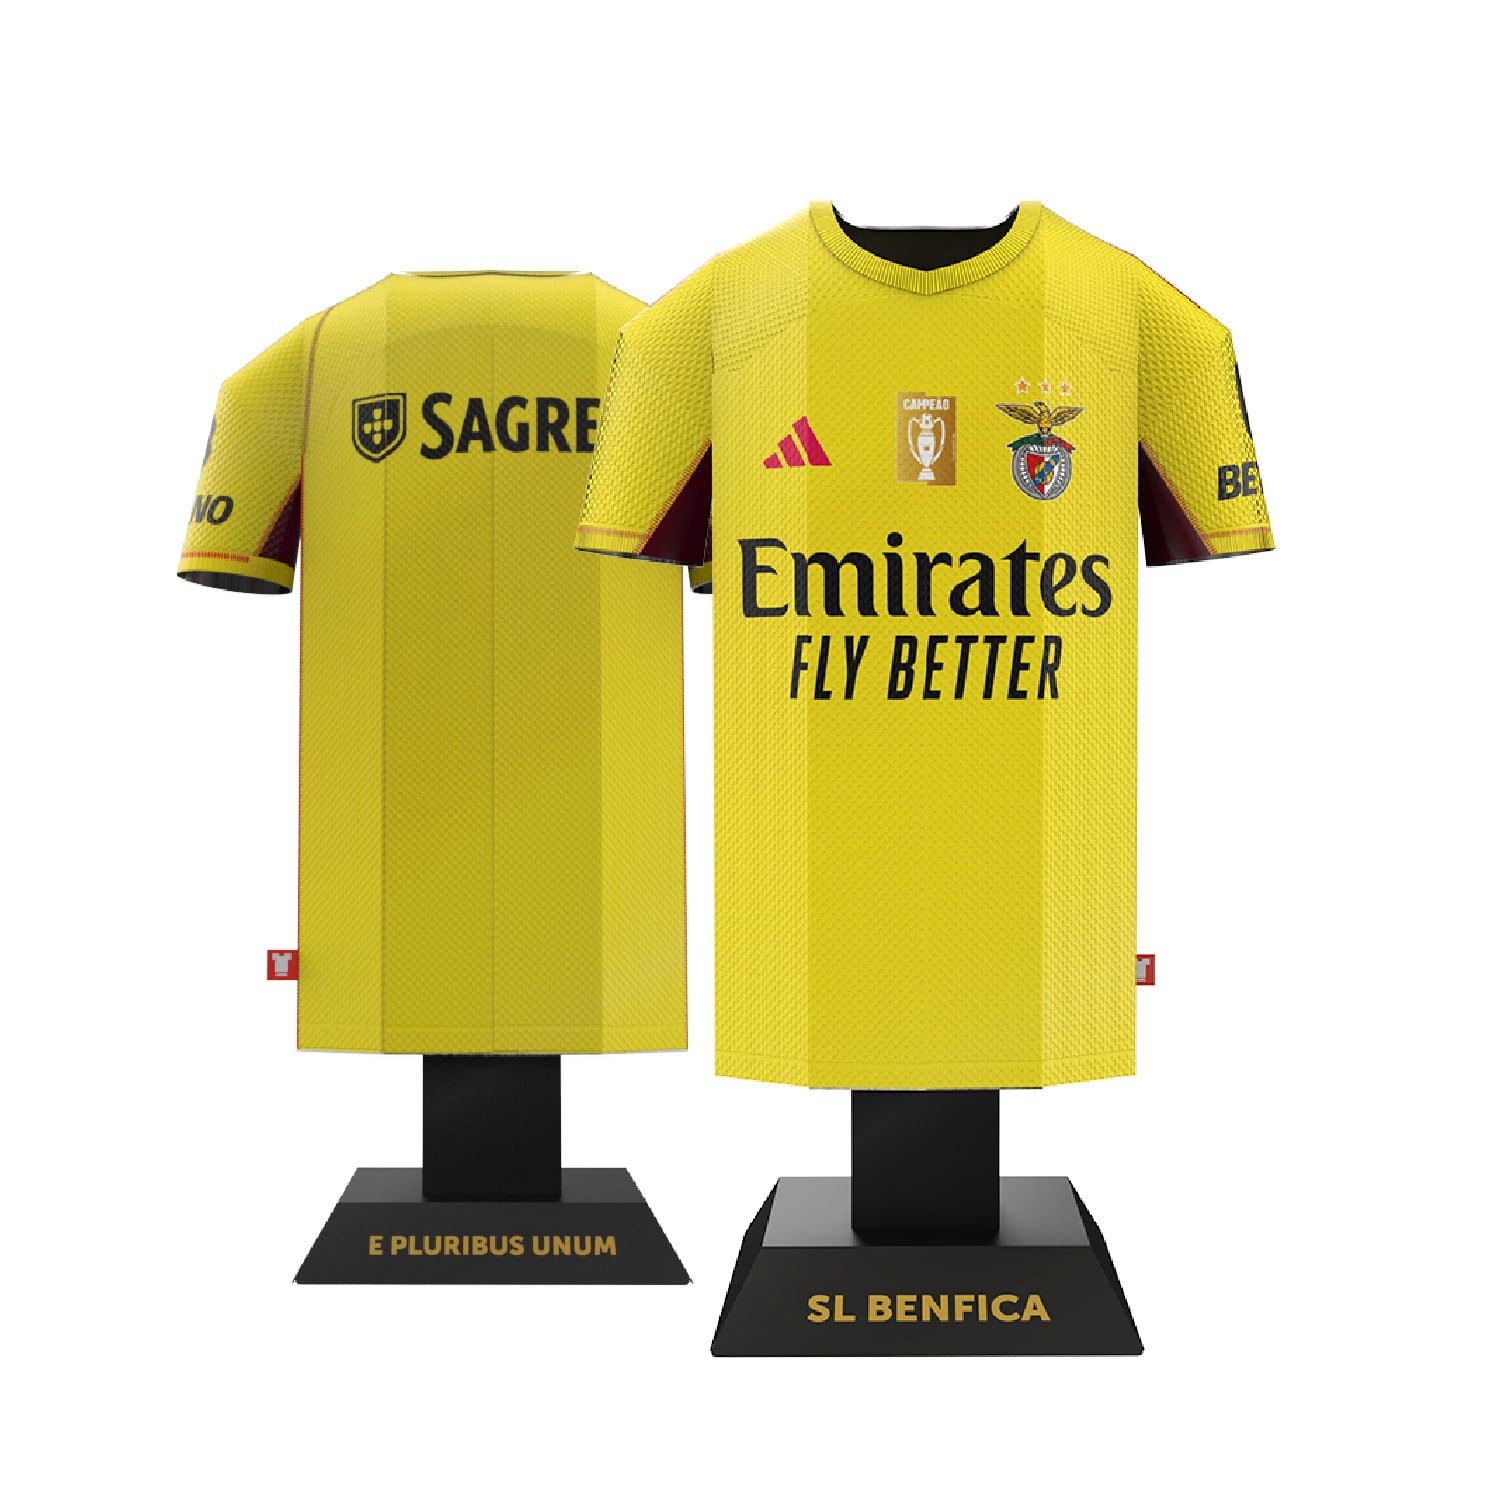 Benfica goalkeeper kit front and back view